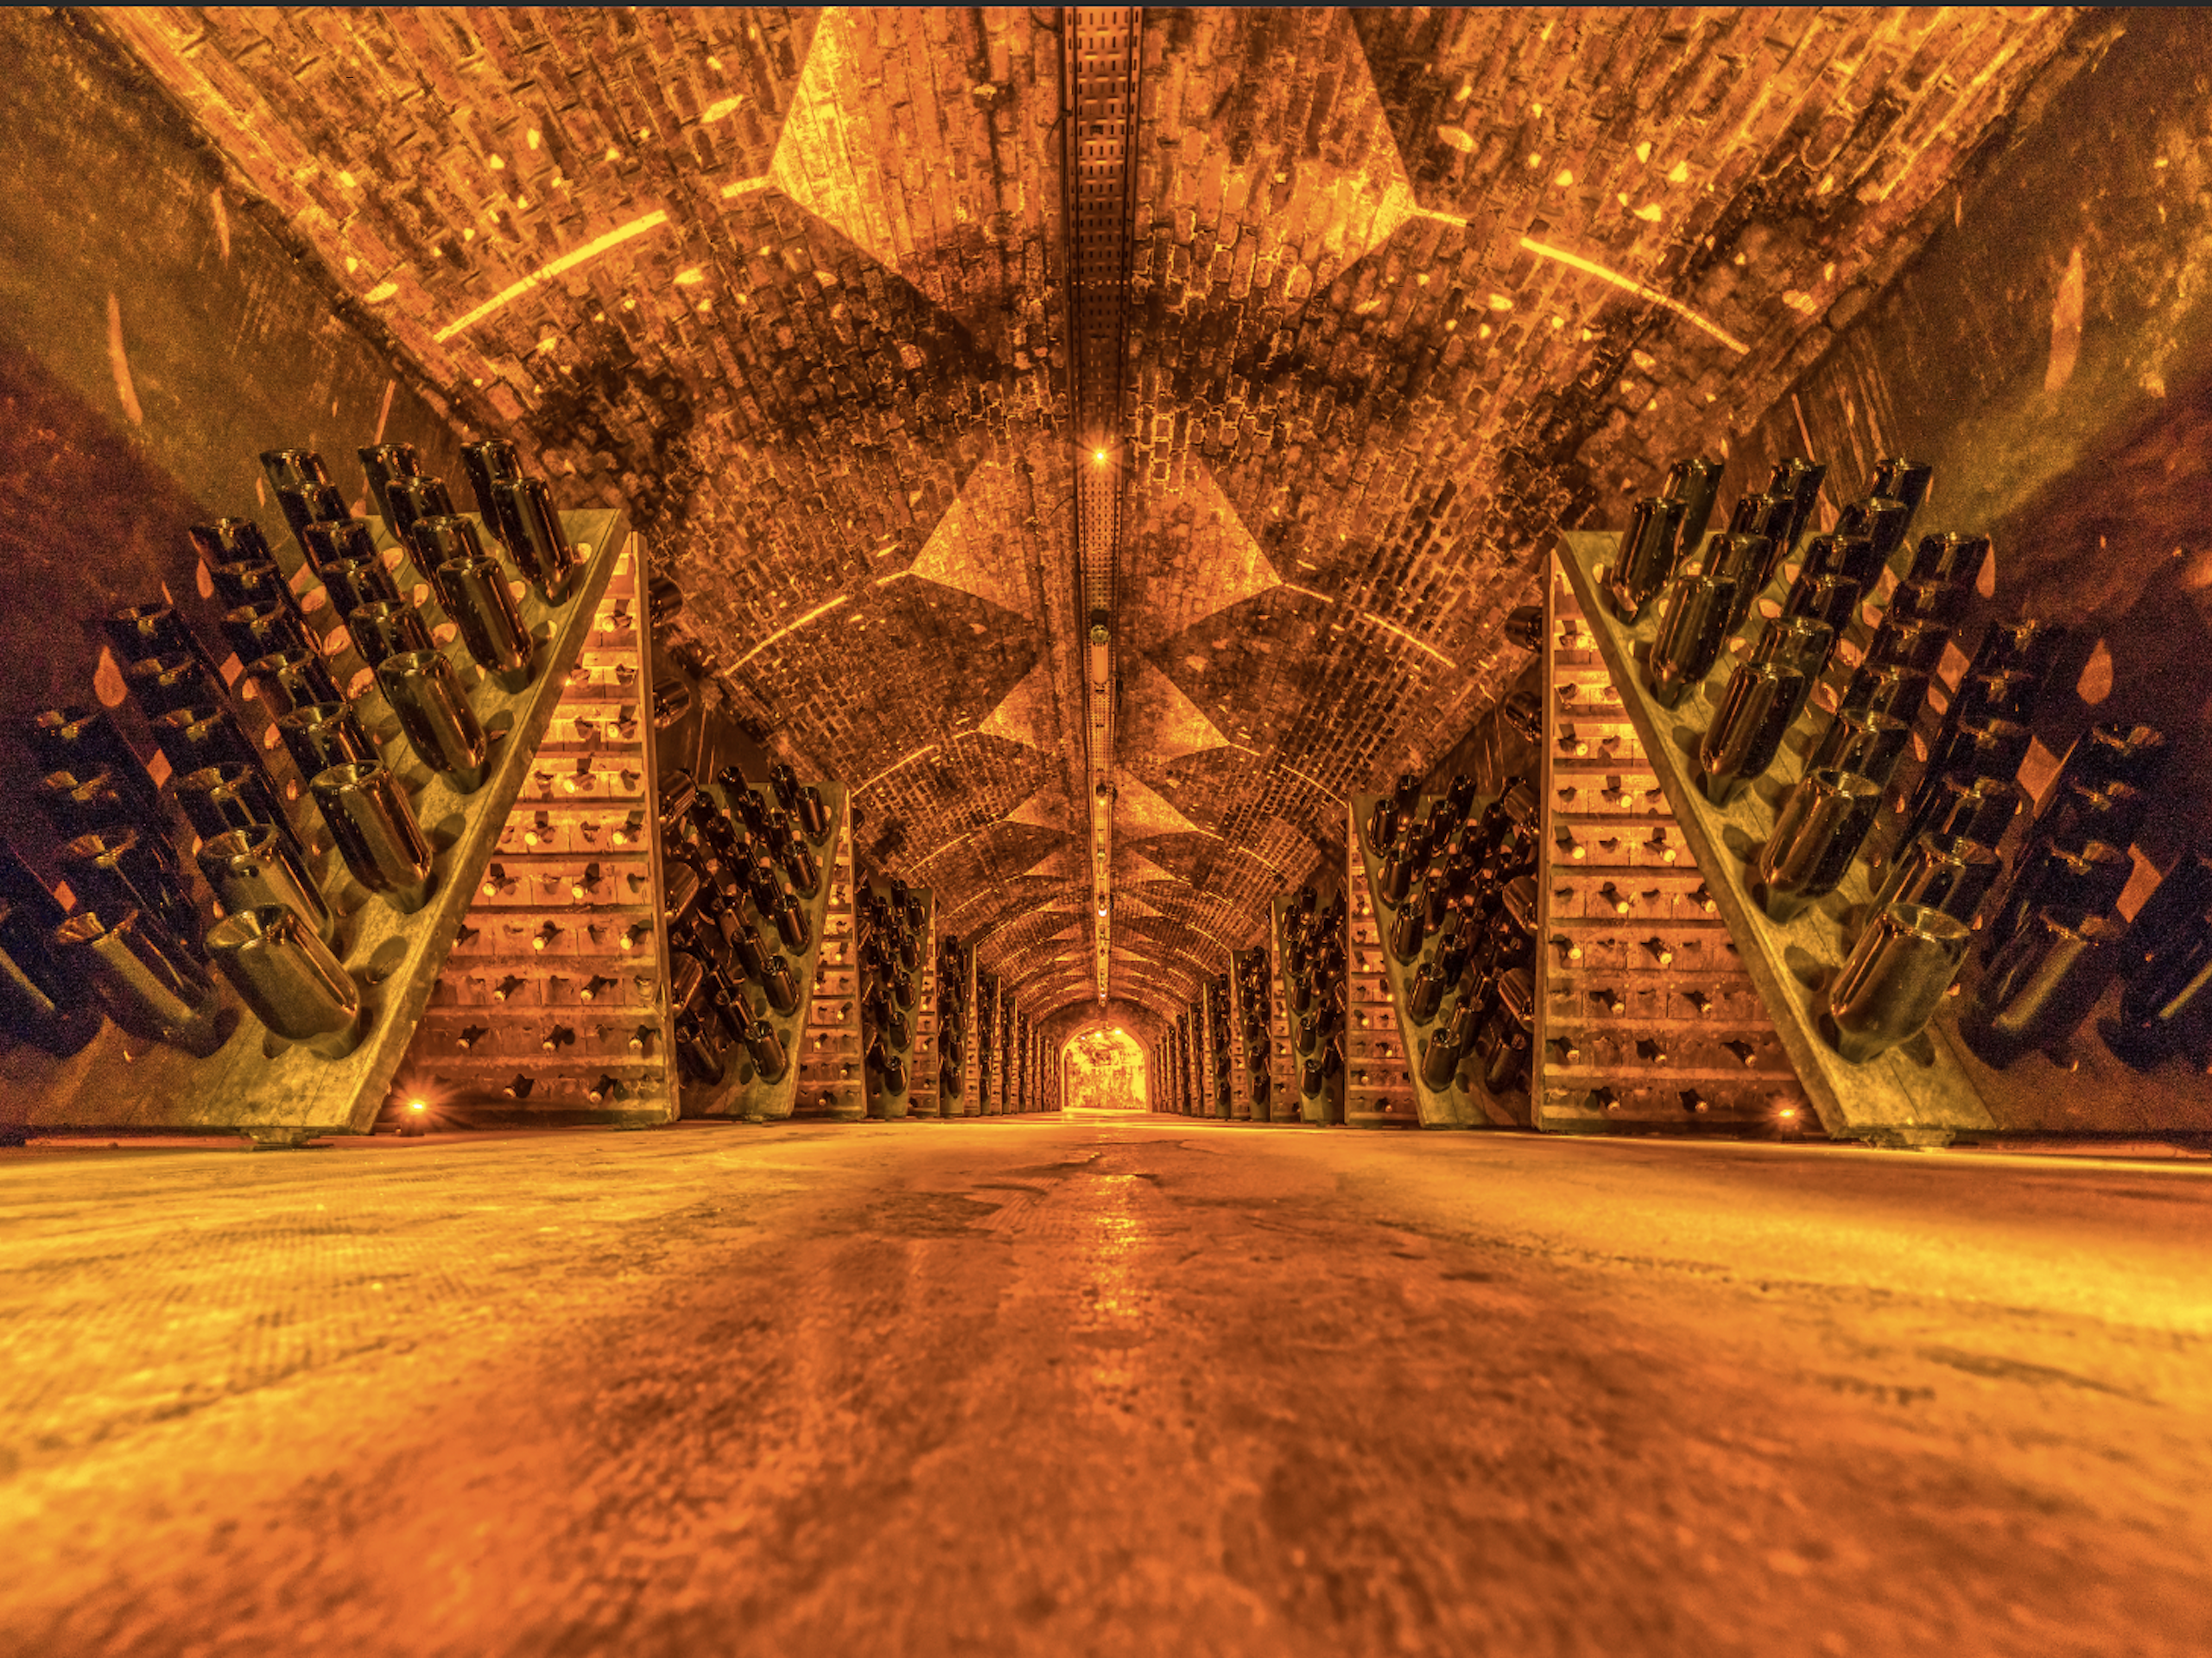 Long ageing in cool, underground cellars is a key part of Champagne's style and flavour.